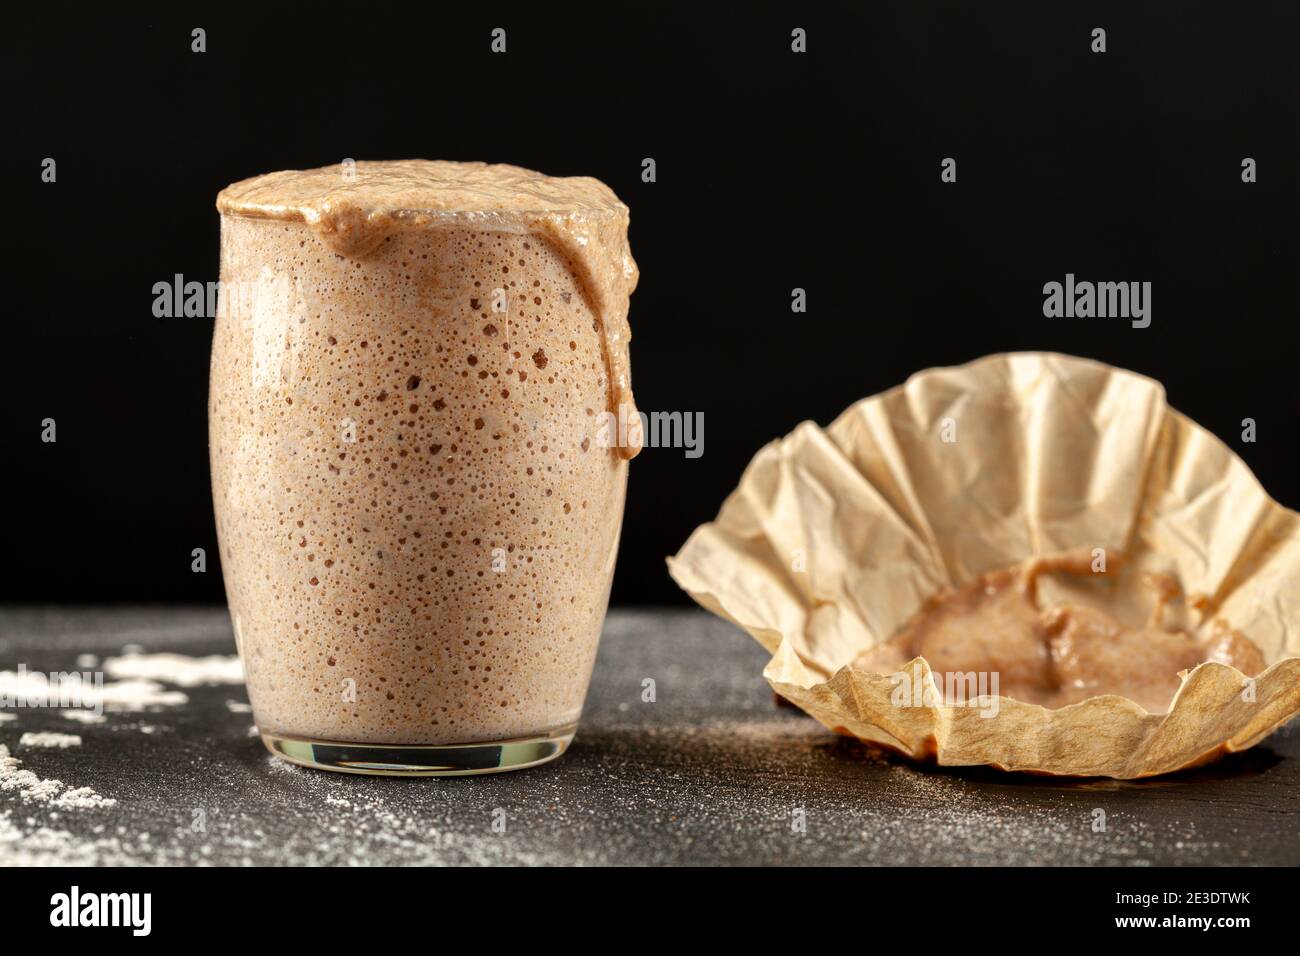 Side view of an actively rising sourdough starter culture which is overflowing over the top of the glass cup it is in. Bubbles show fermentation. The Stock Photo